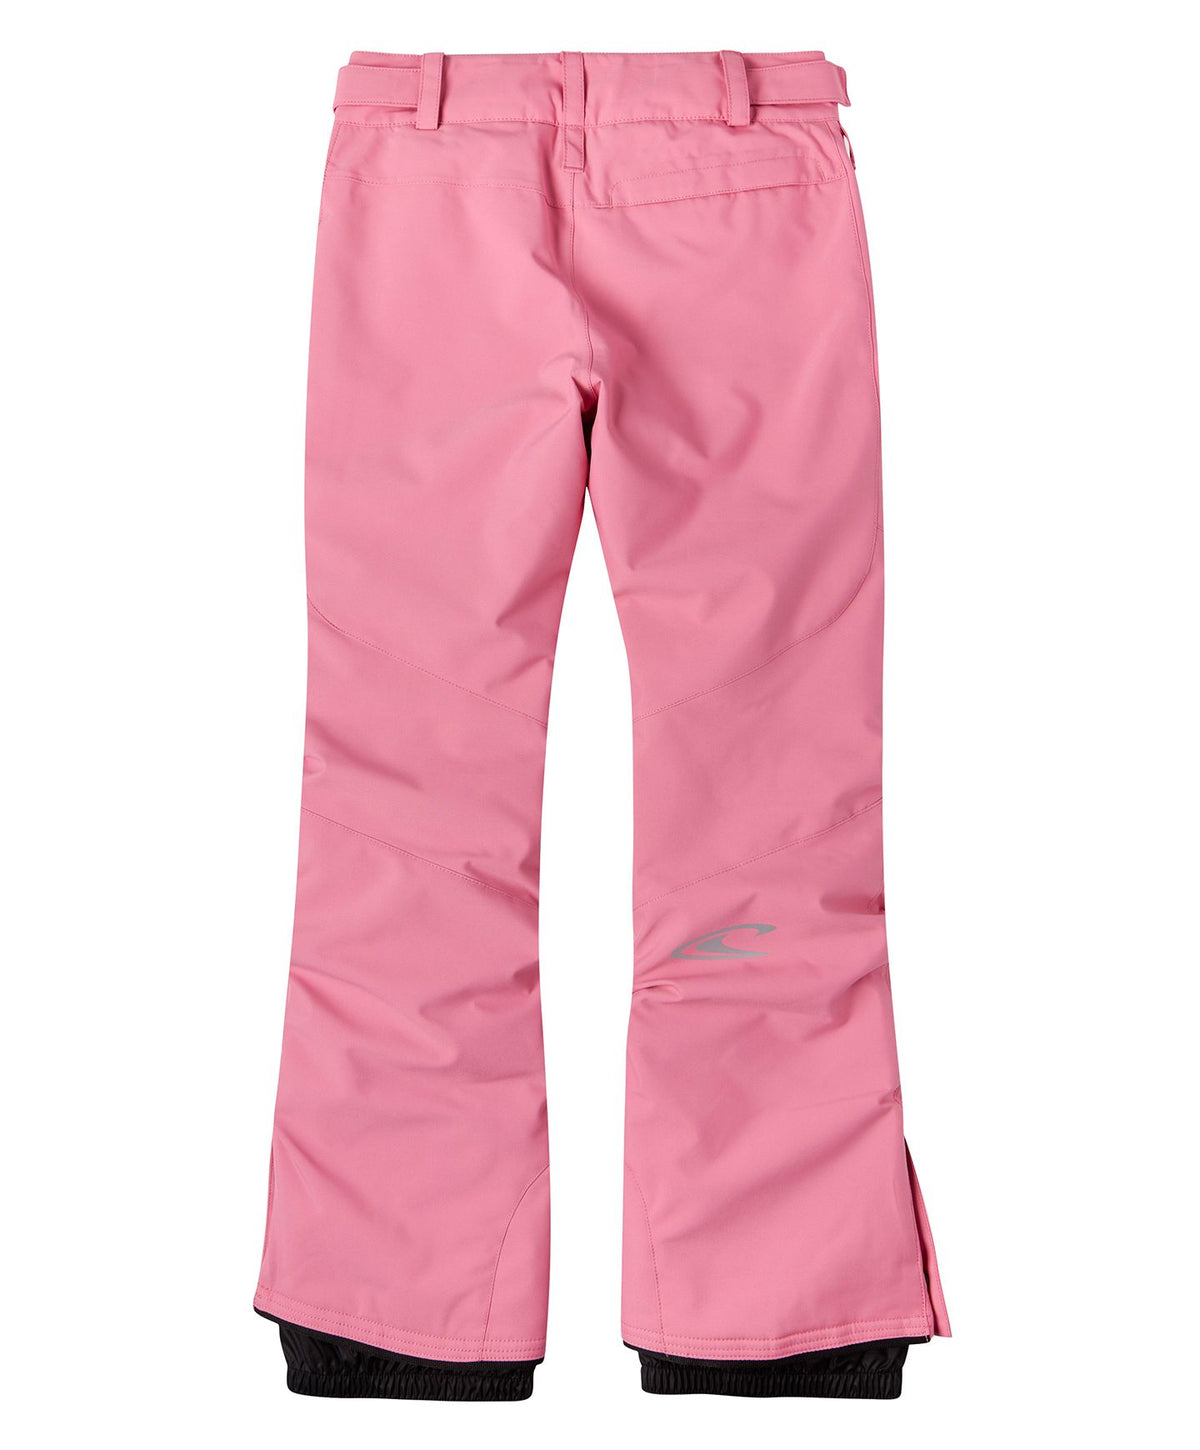 Girl's Charm Snow Pants - Chateau Rose